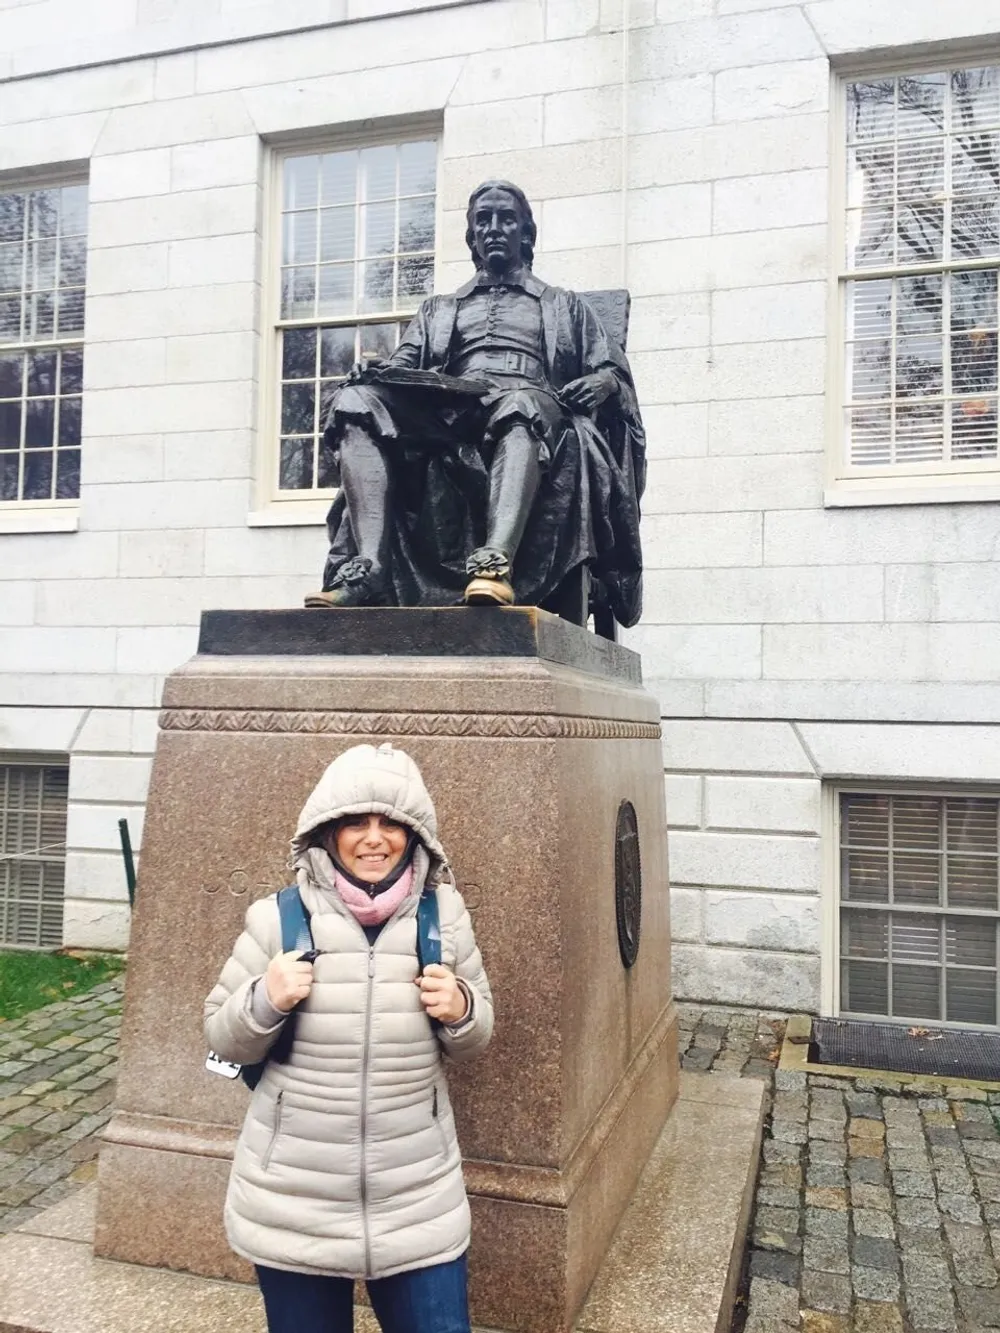 A person wearing a hooded coat and a backpack is smiling with thumbs up in front of a seated bronze statue of a historical figure on a stone pedestal